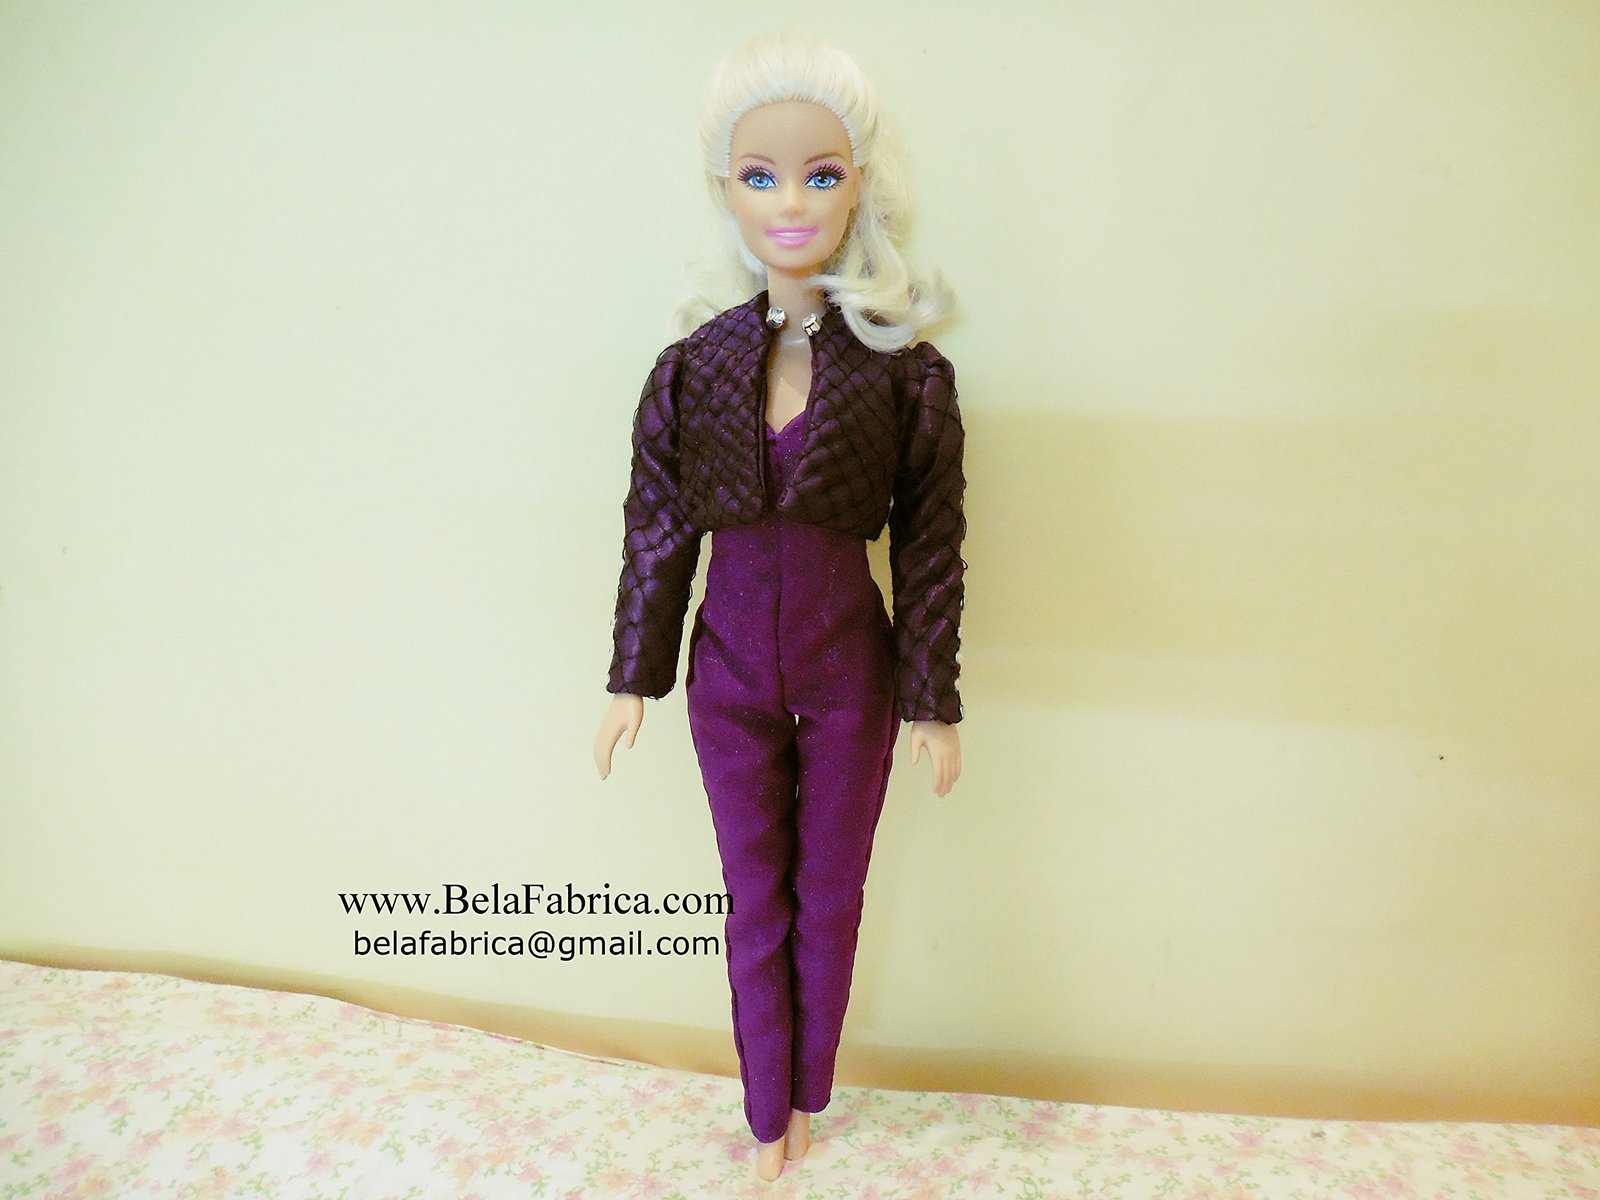 Personalized Selena Quintanilla Doll Outfit and 50 similar items